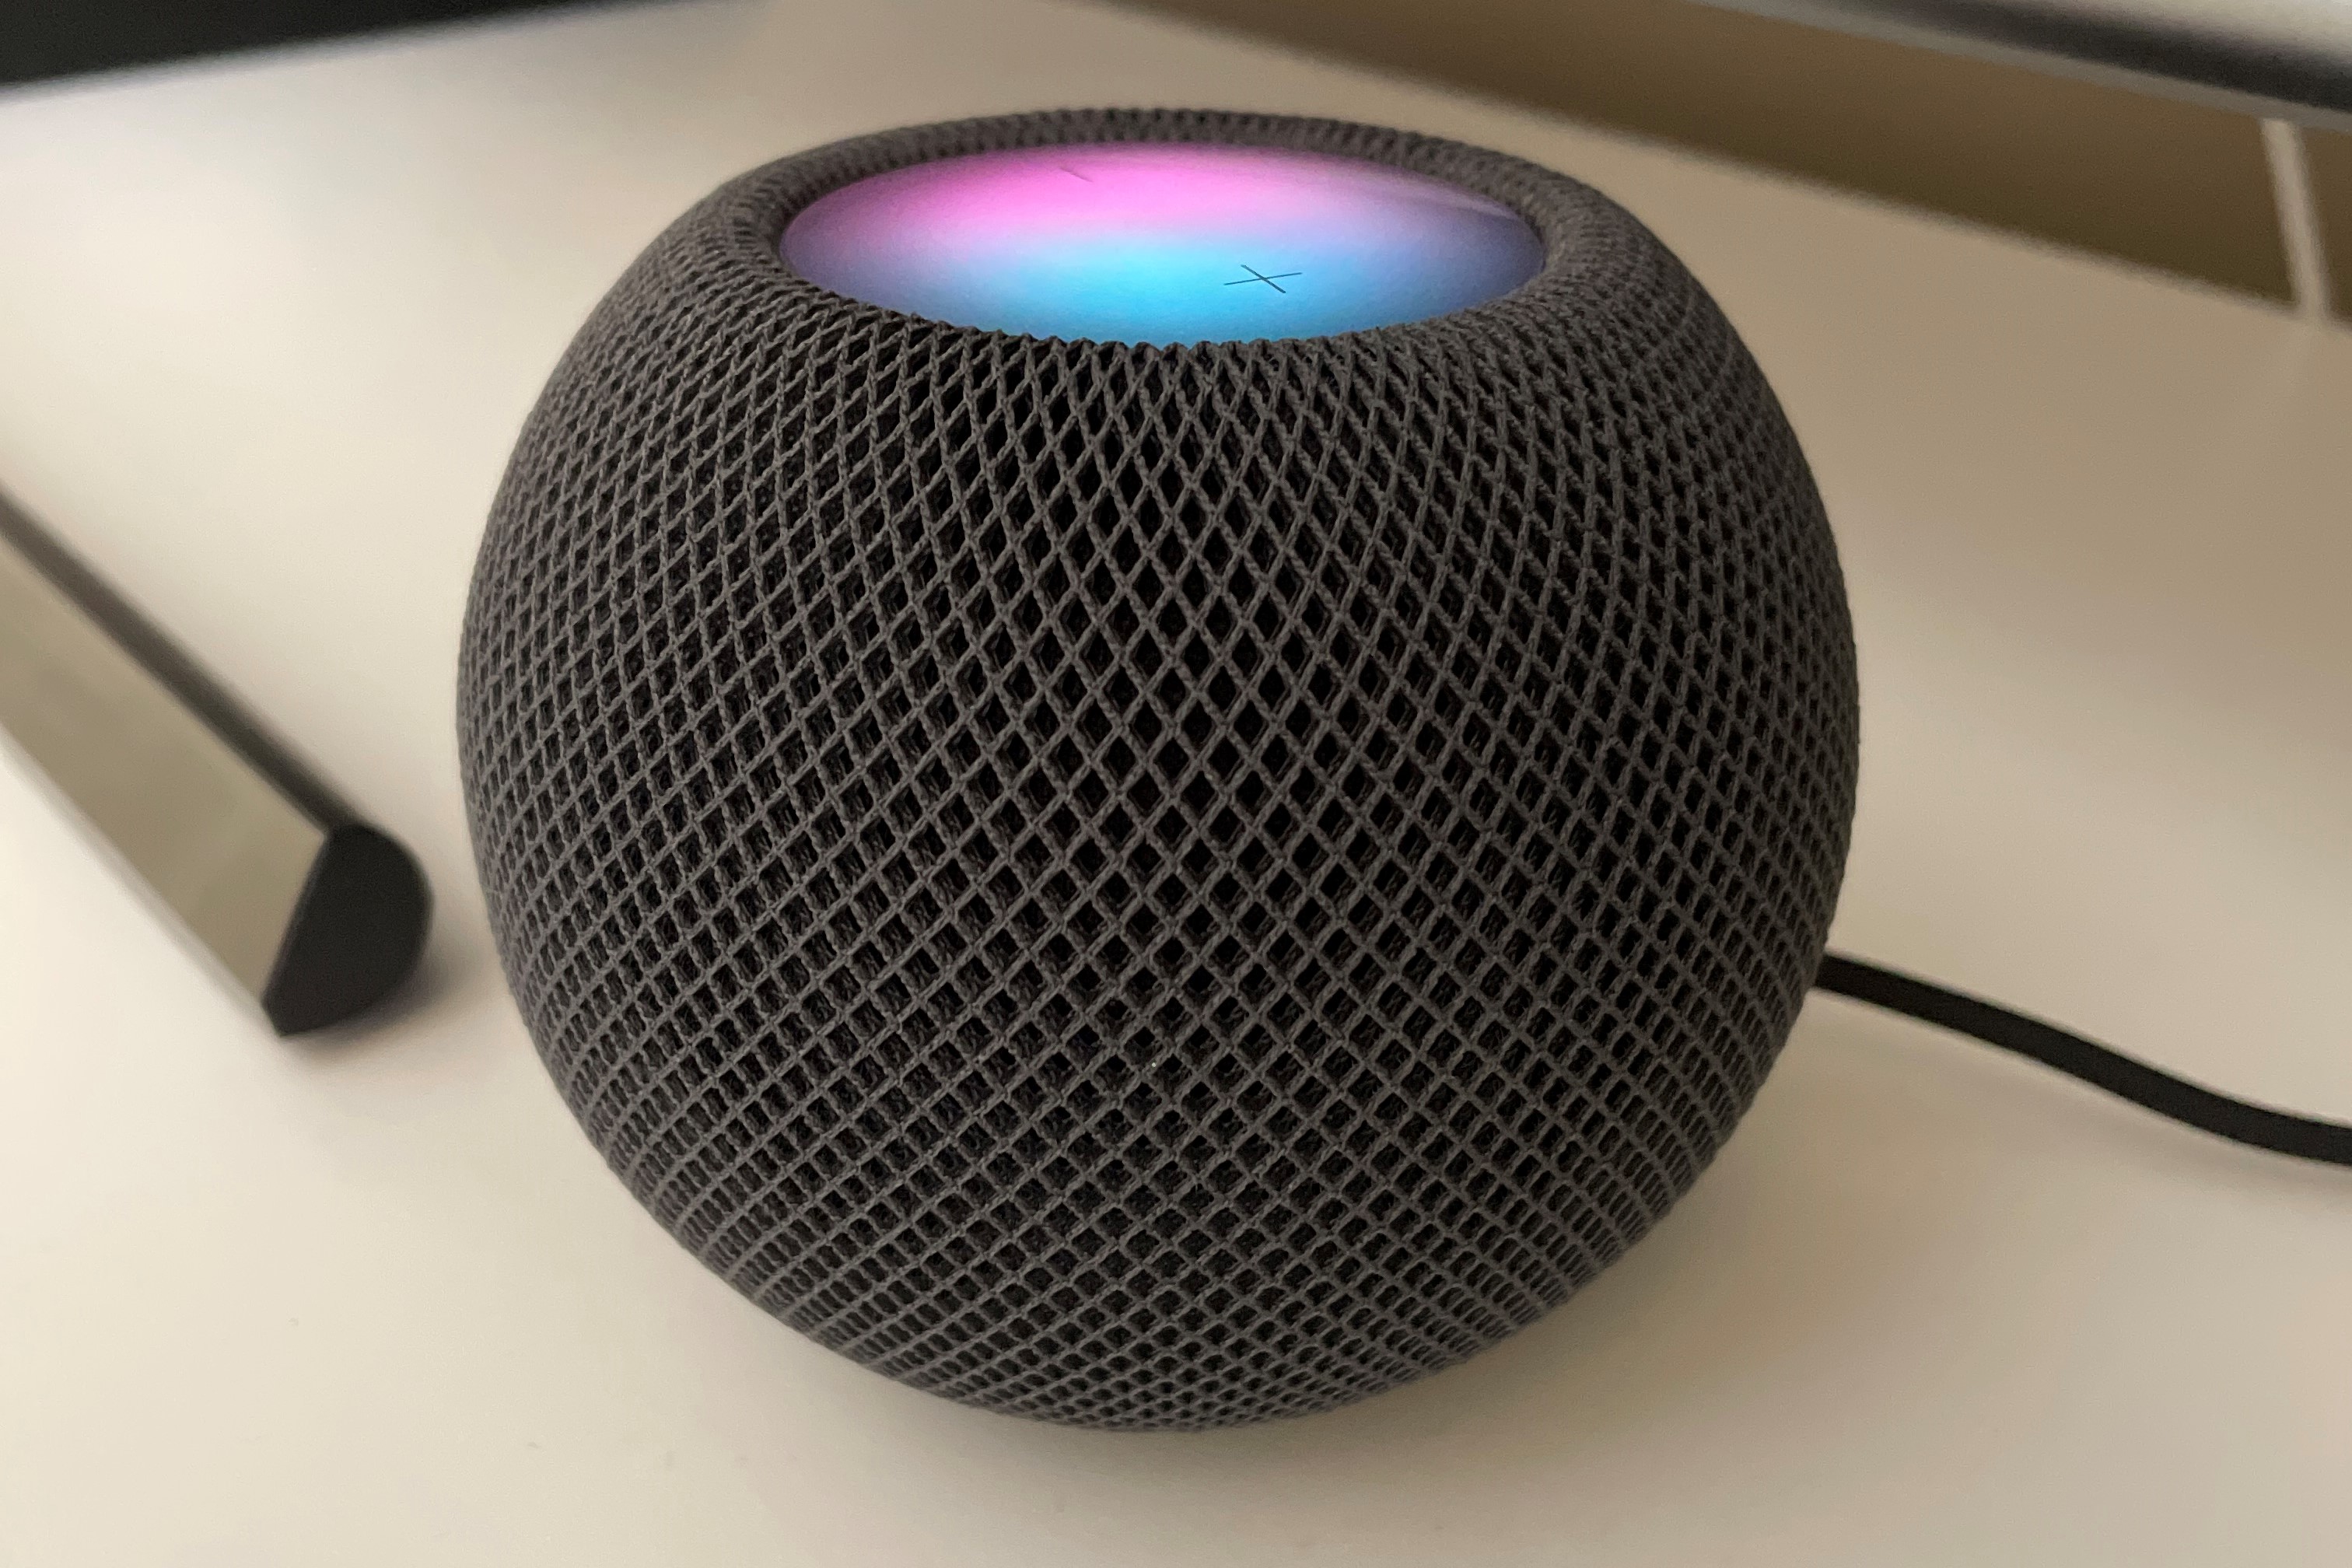 Apple HomePod Mini Review: Is it worth it? | Reviews.org